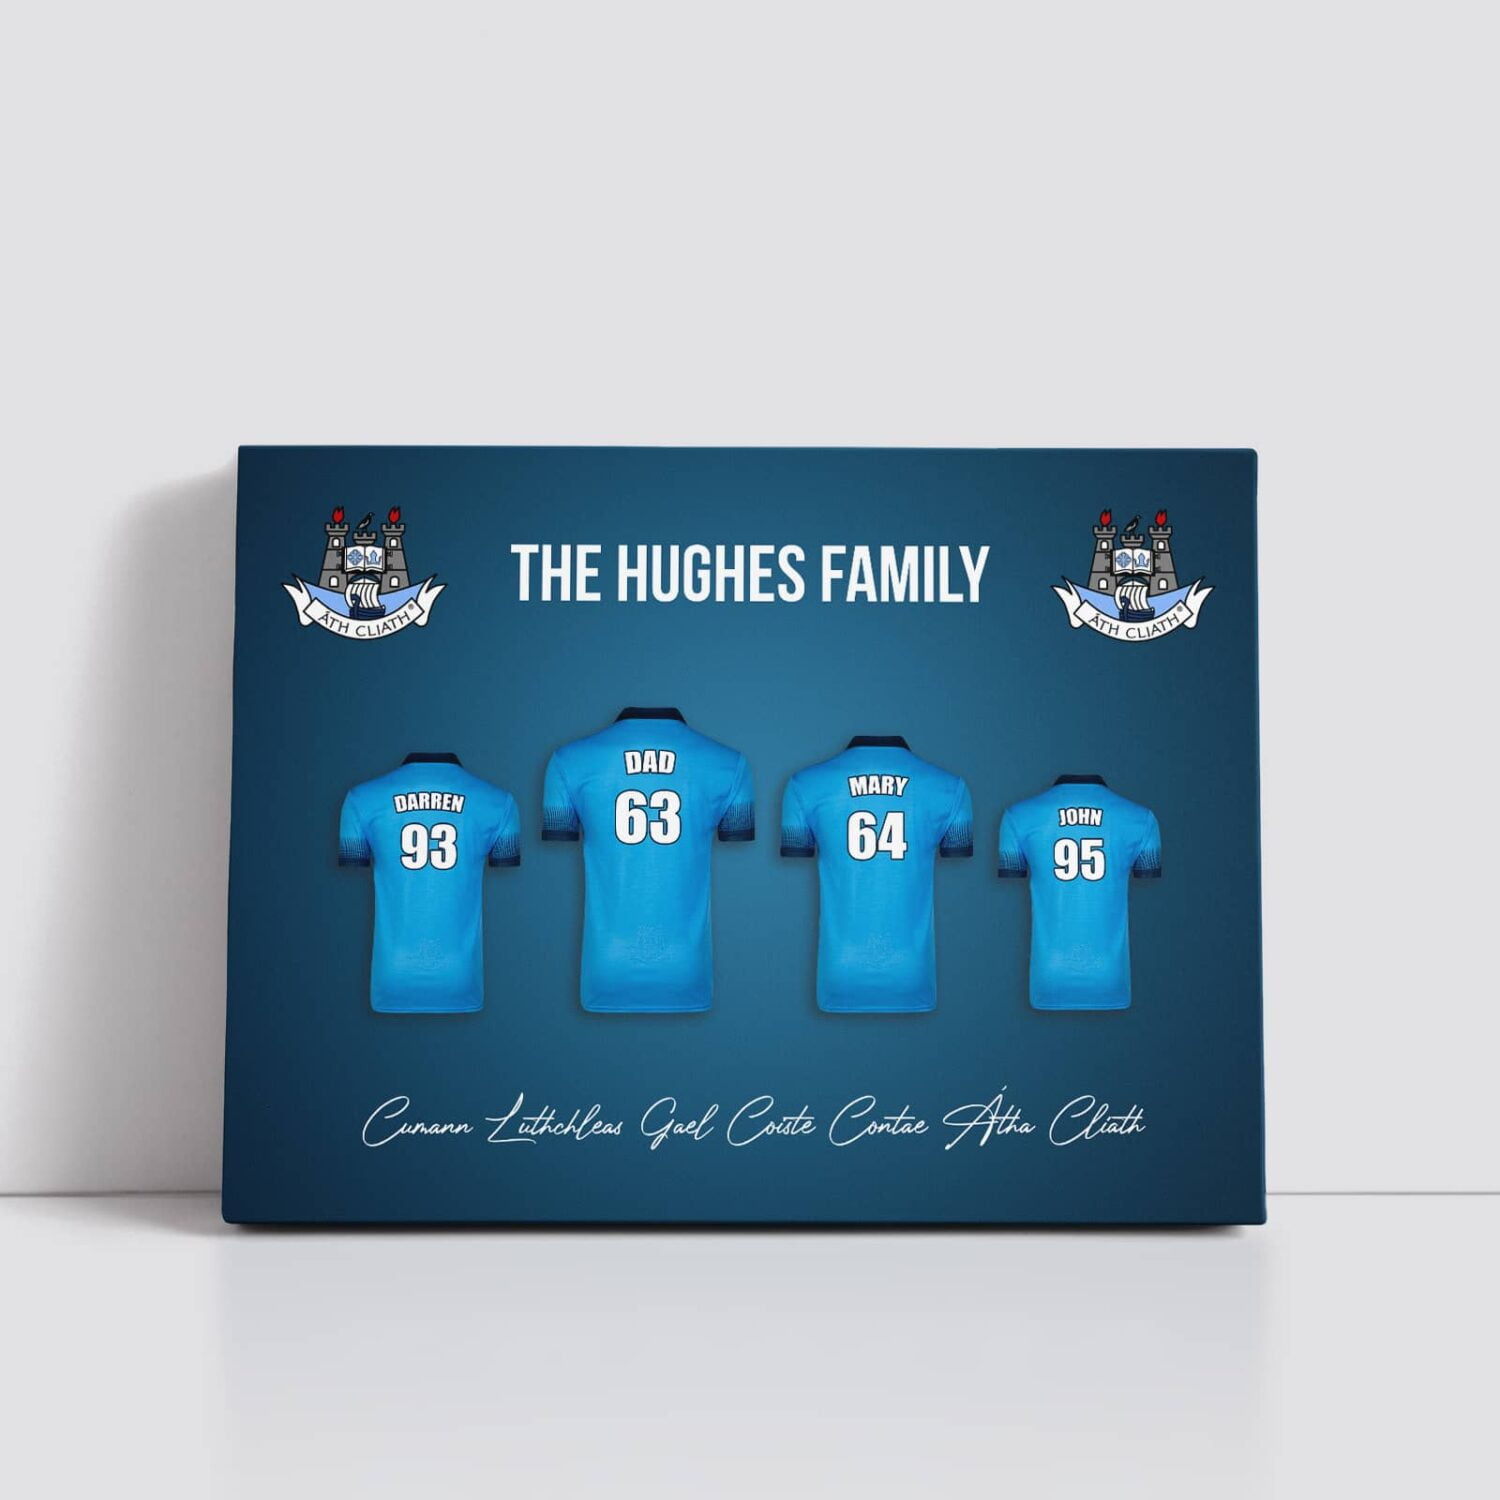 Personalised Jersey Print with each family members name on the back of the jersey and their birth year.